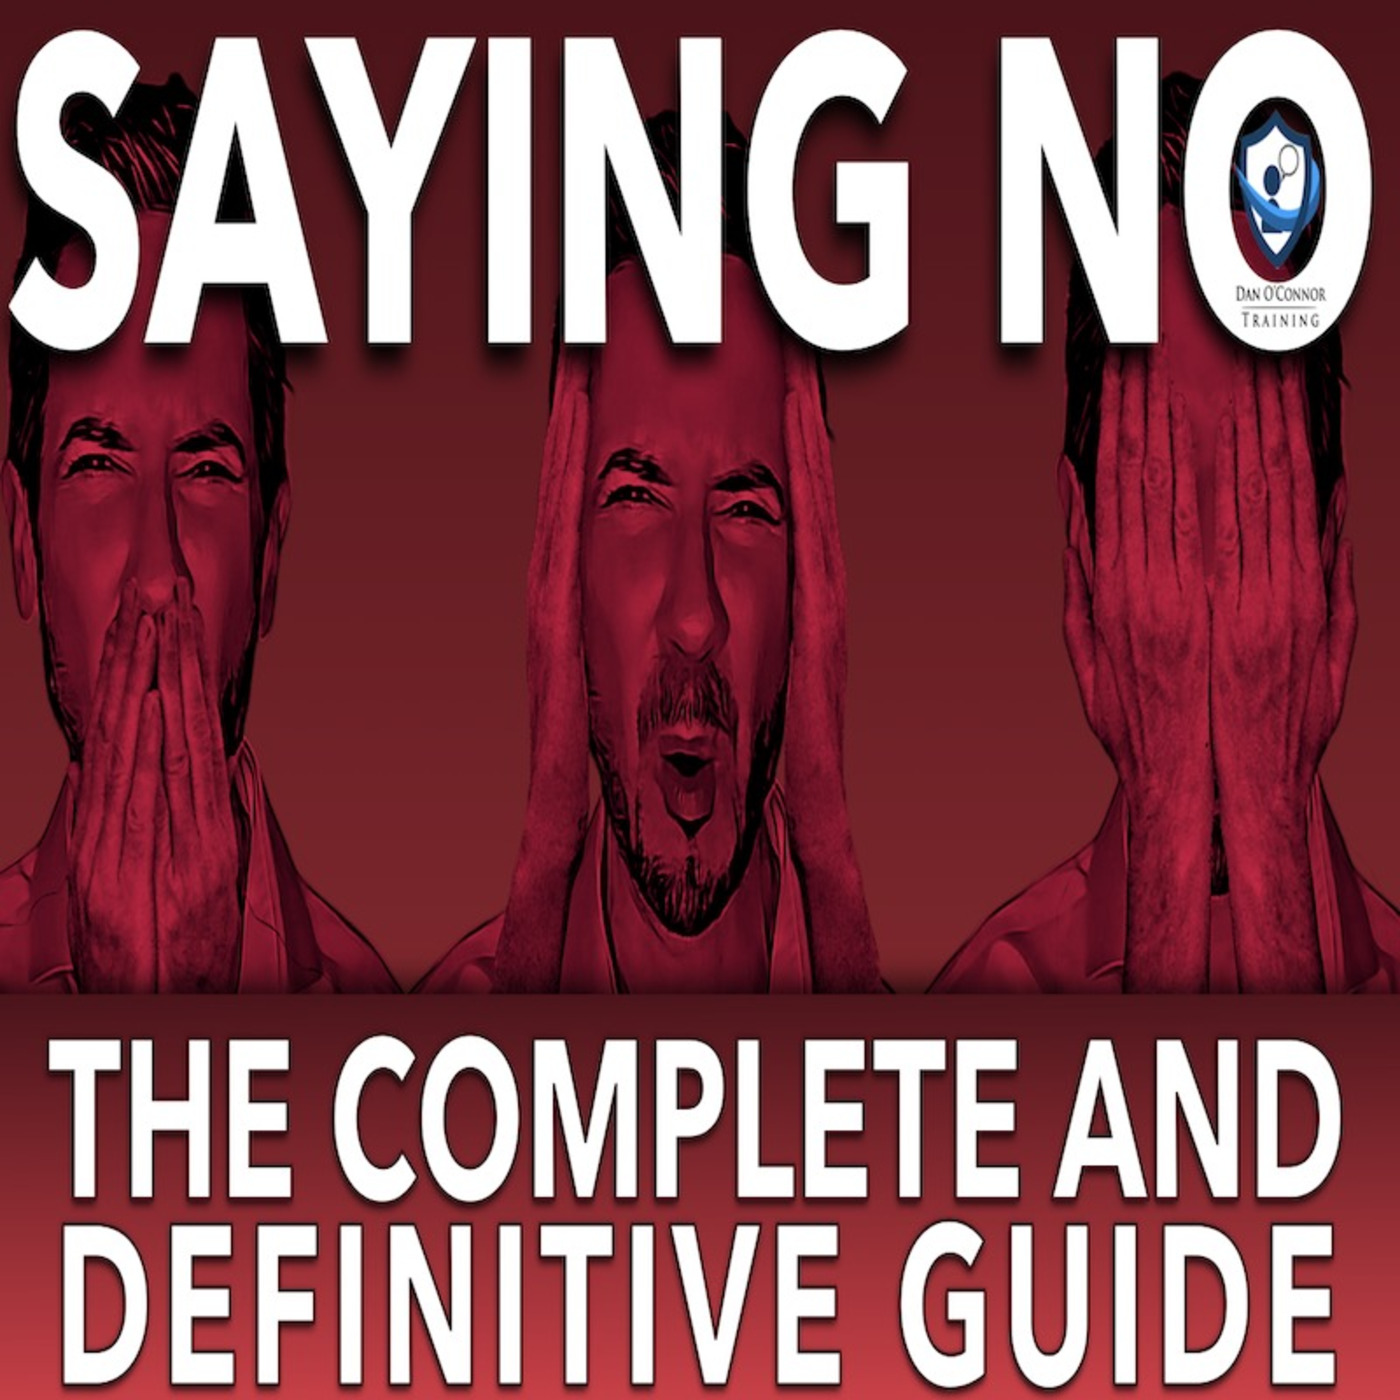 How to Say No: The Complete and Definitive Guide Audio Only Version